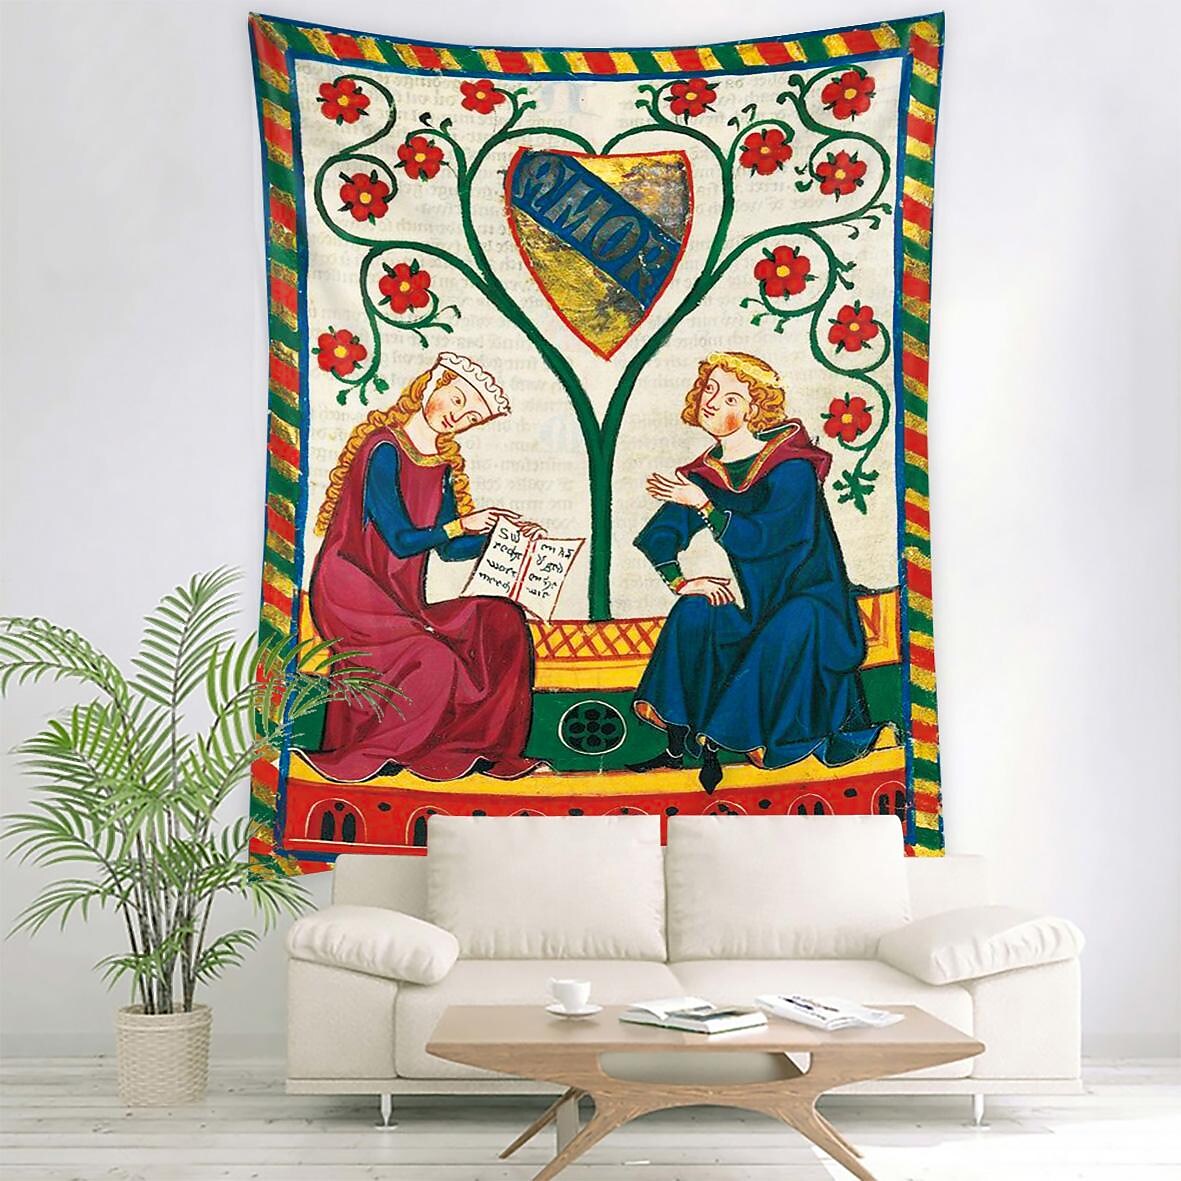 Medieval Large Wall Tapestry Art Decor